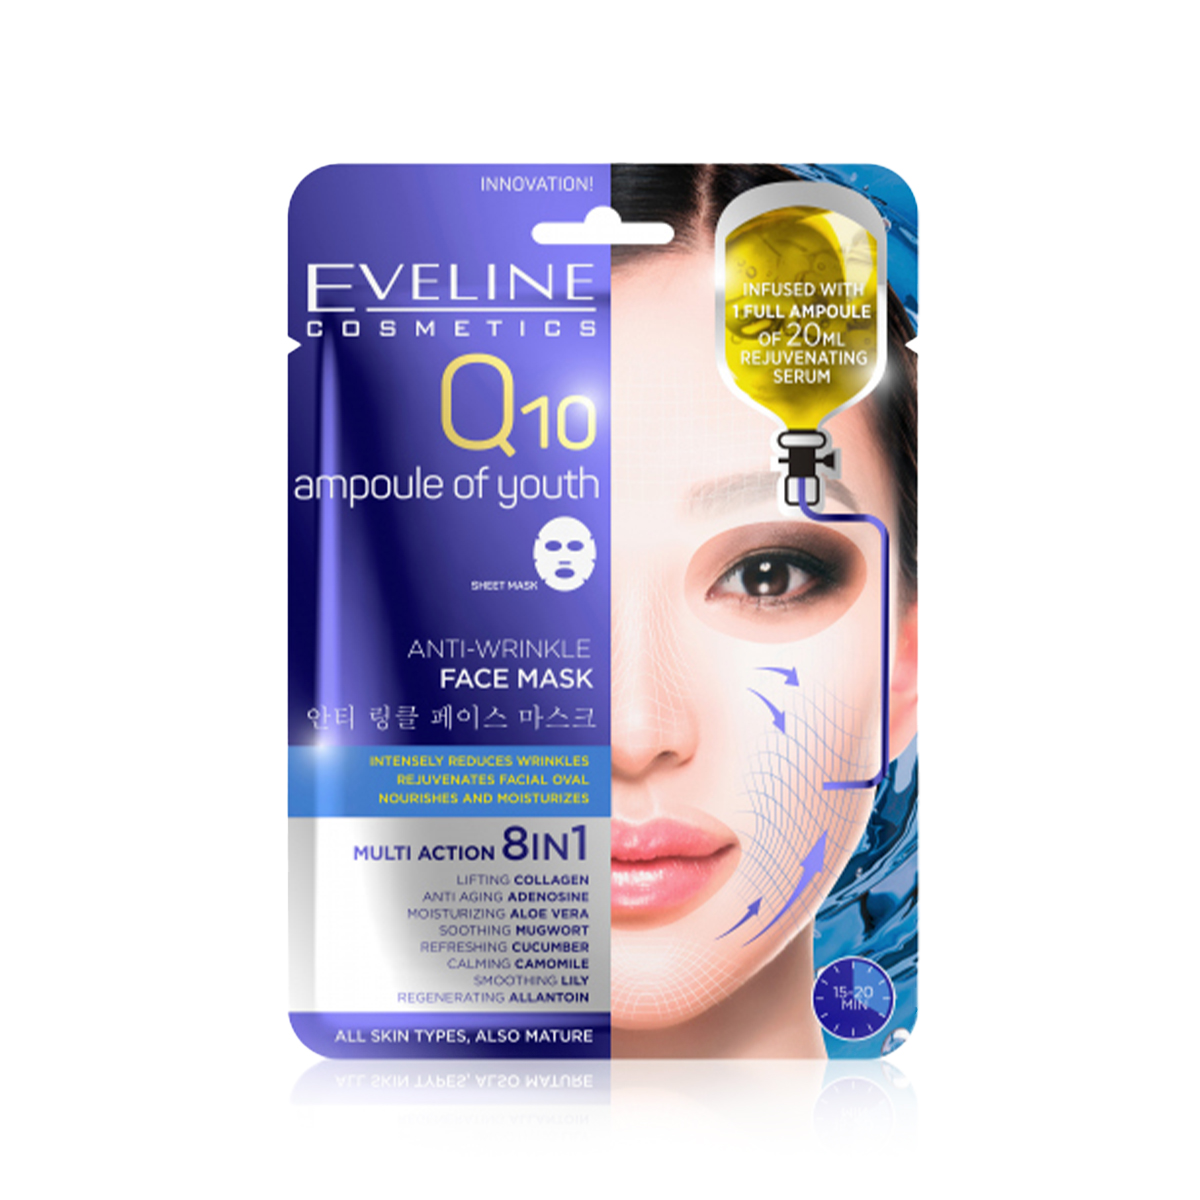 137- 5901761971637-Eveline Cosmetics Q10 Ampoule of Youth Anti-Wrinkle Face Mask